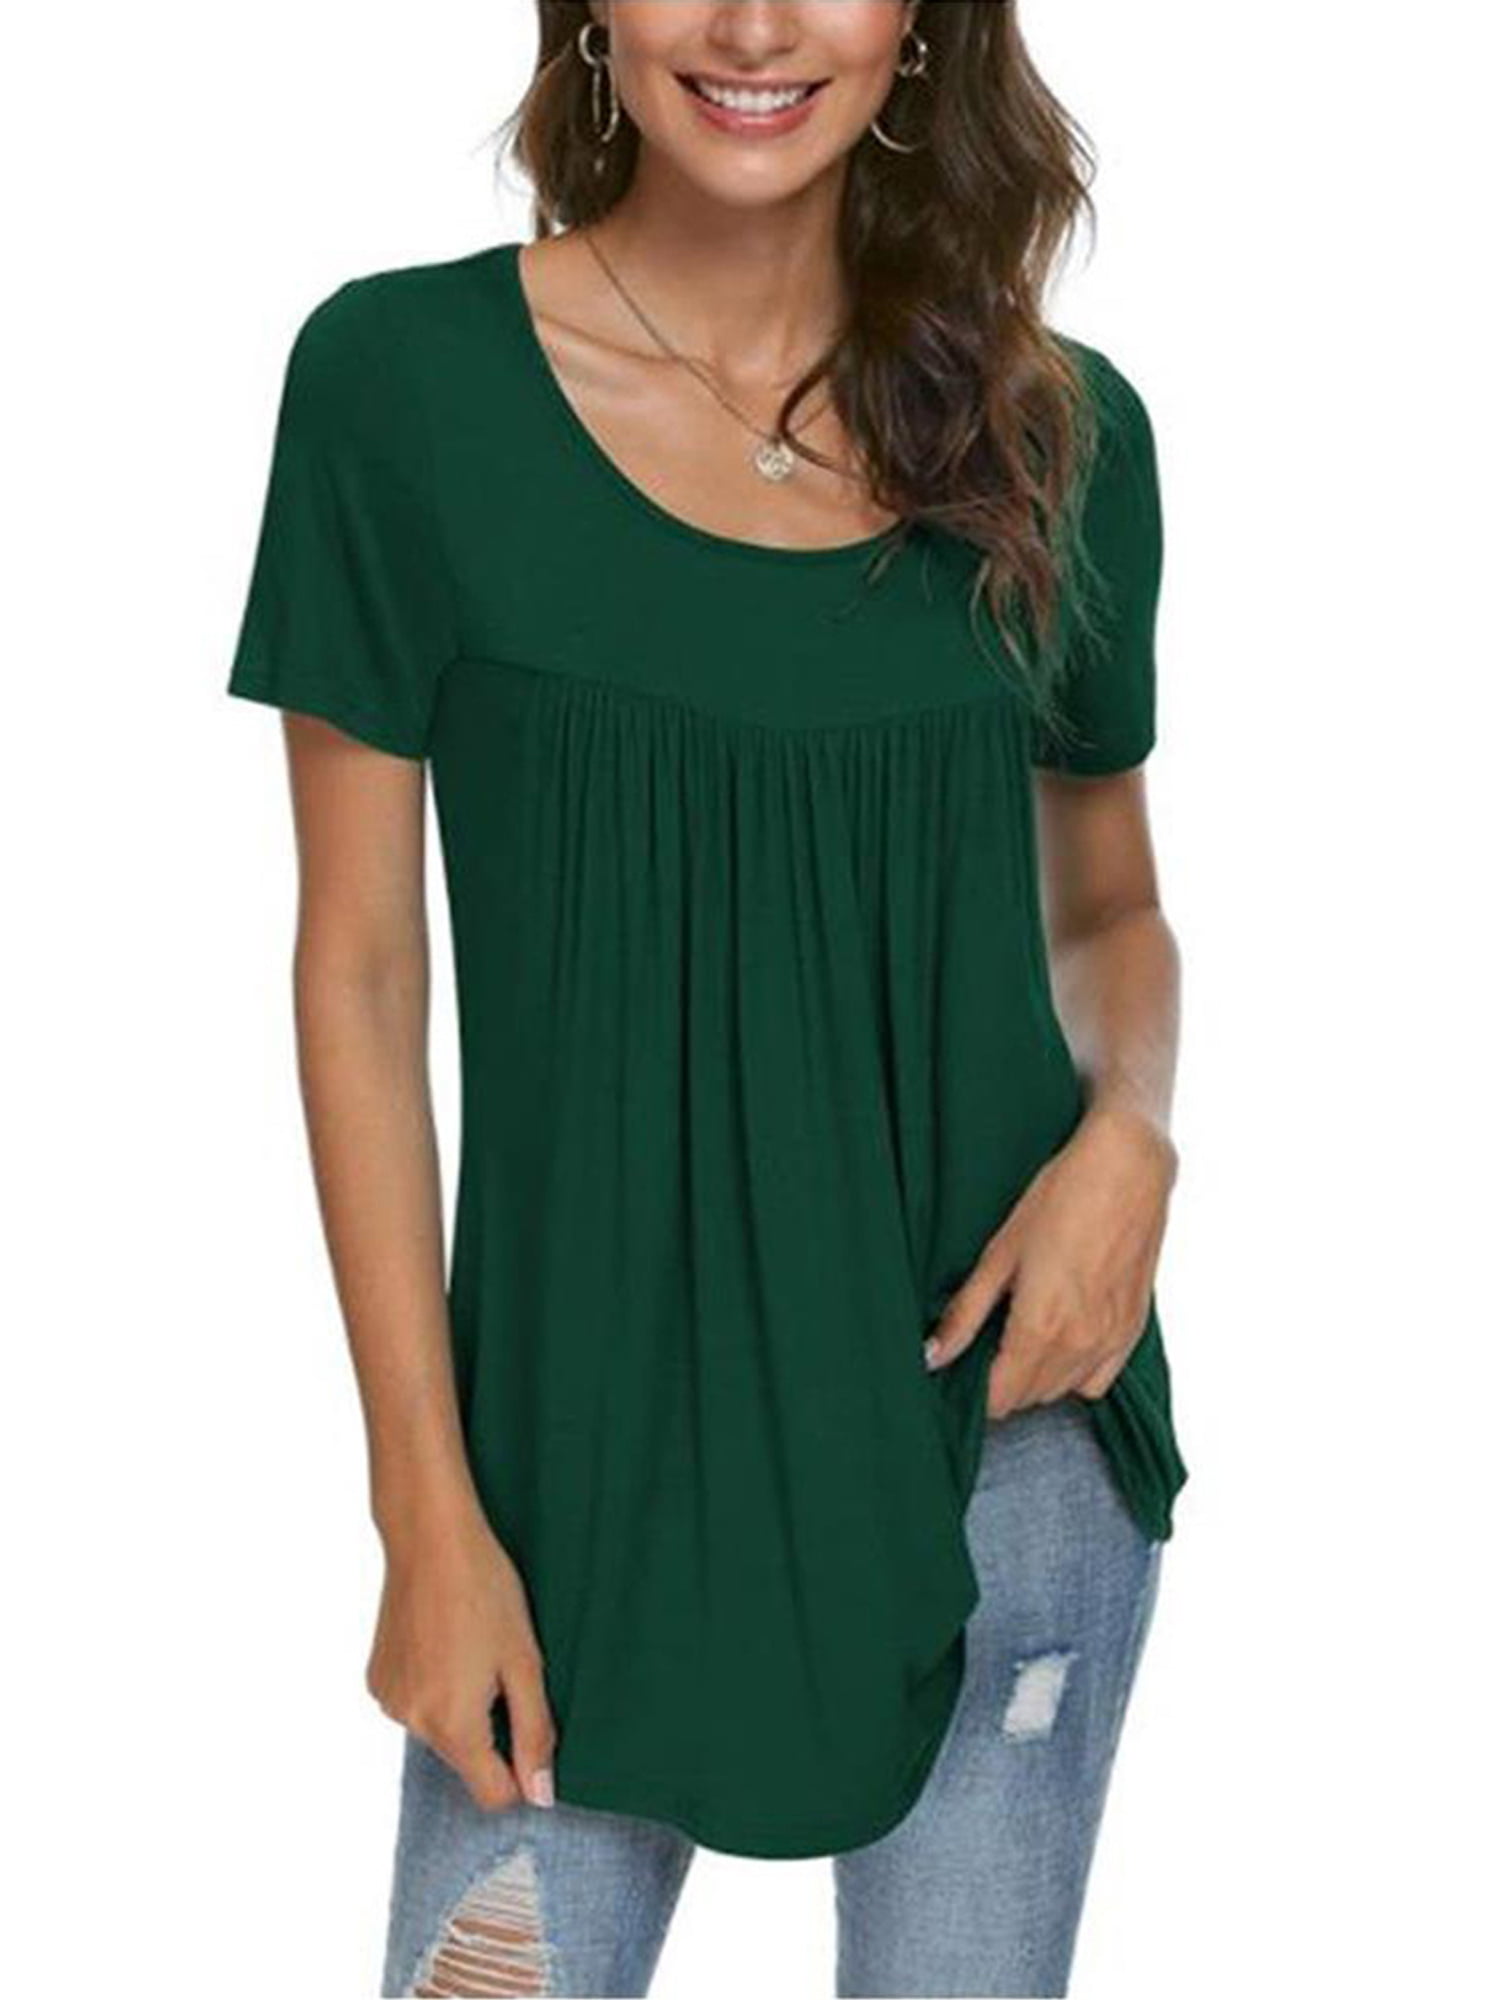 Casual Women Tops Solid Summer T-Shirt Pleated O-Neck Blouse Basic Pullover Fitting Tunic Shirts Tee 